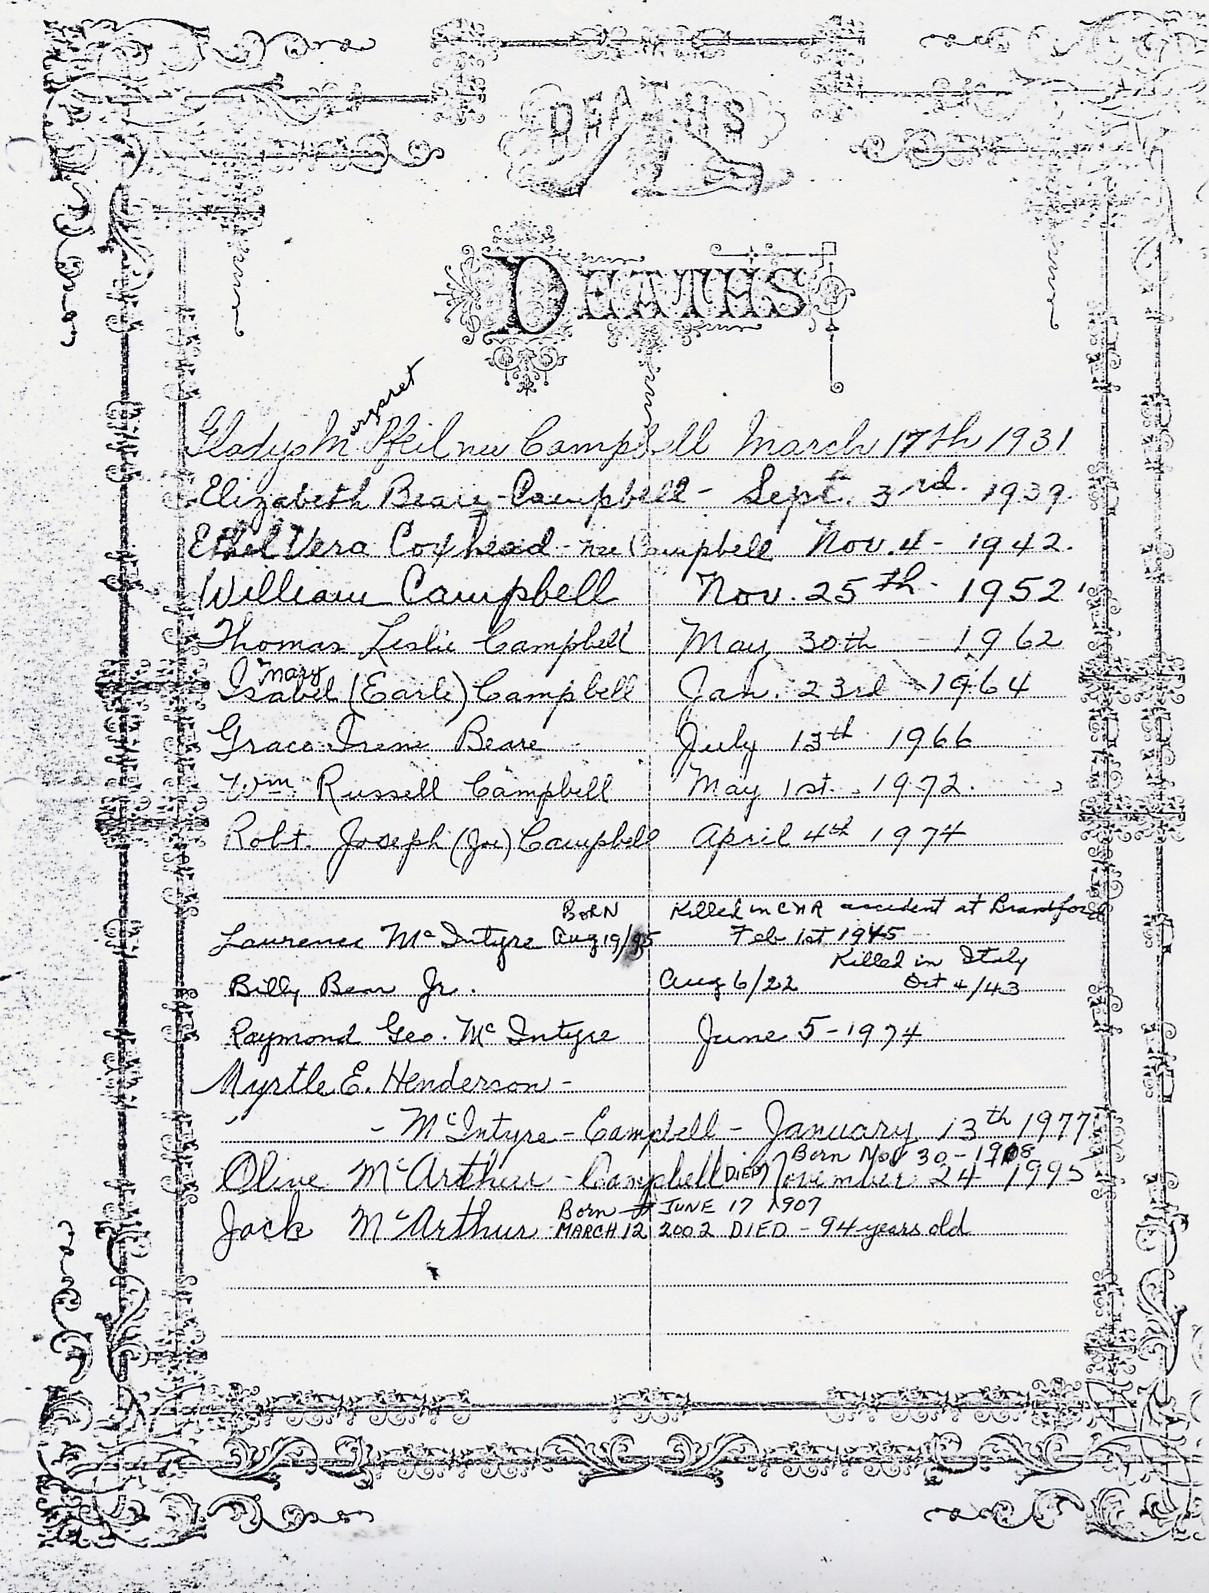 personal - campbell family records from kelly lepage - Deaths.JPG